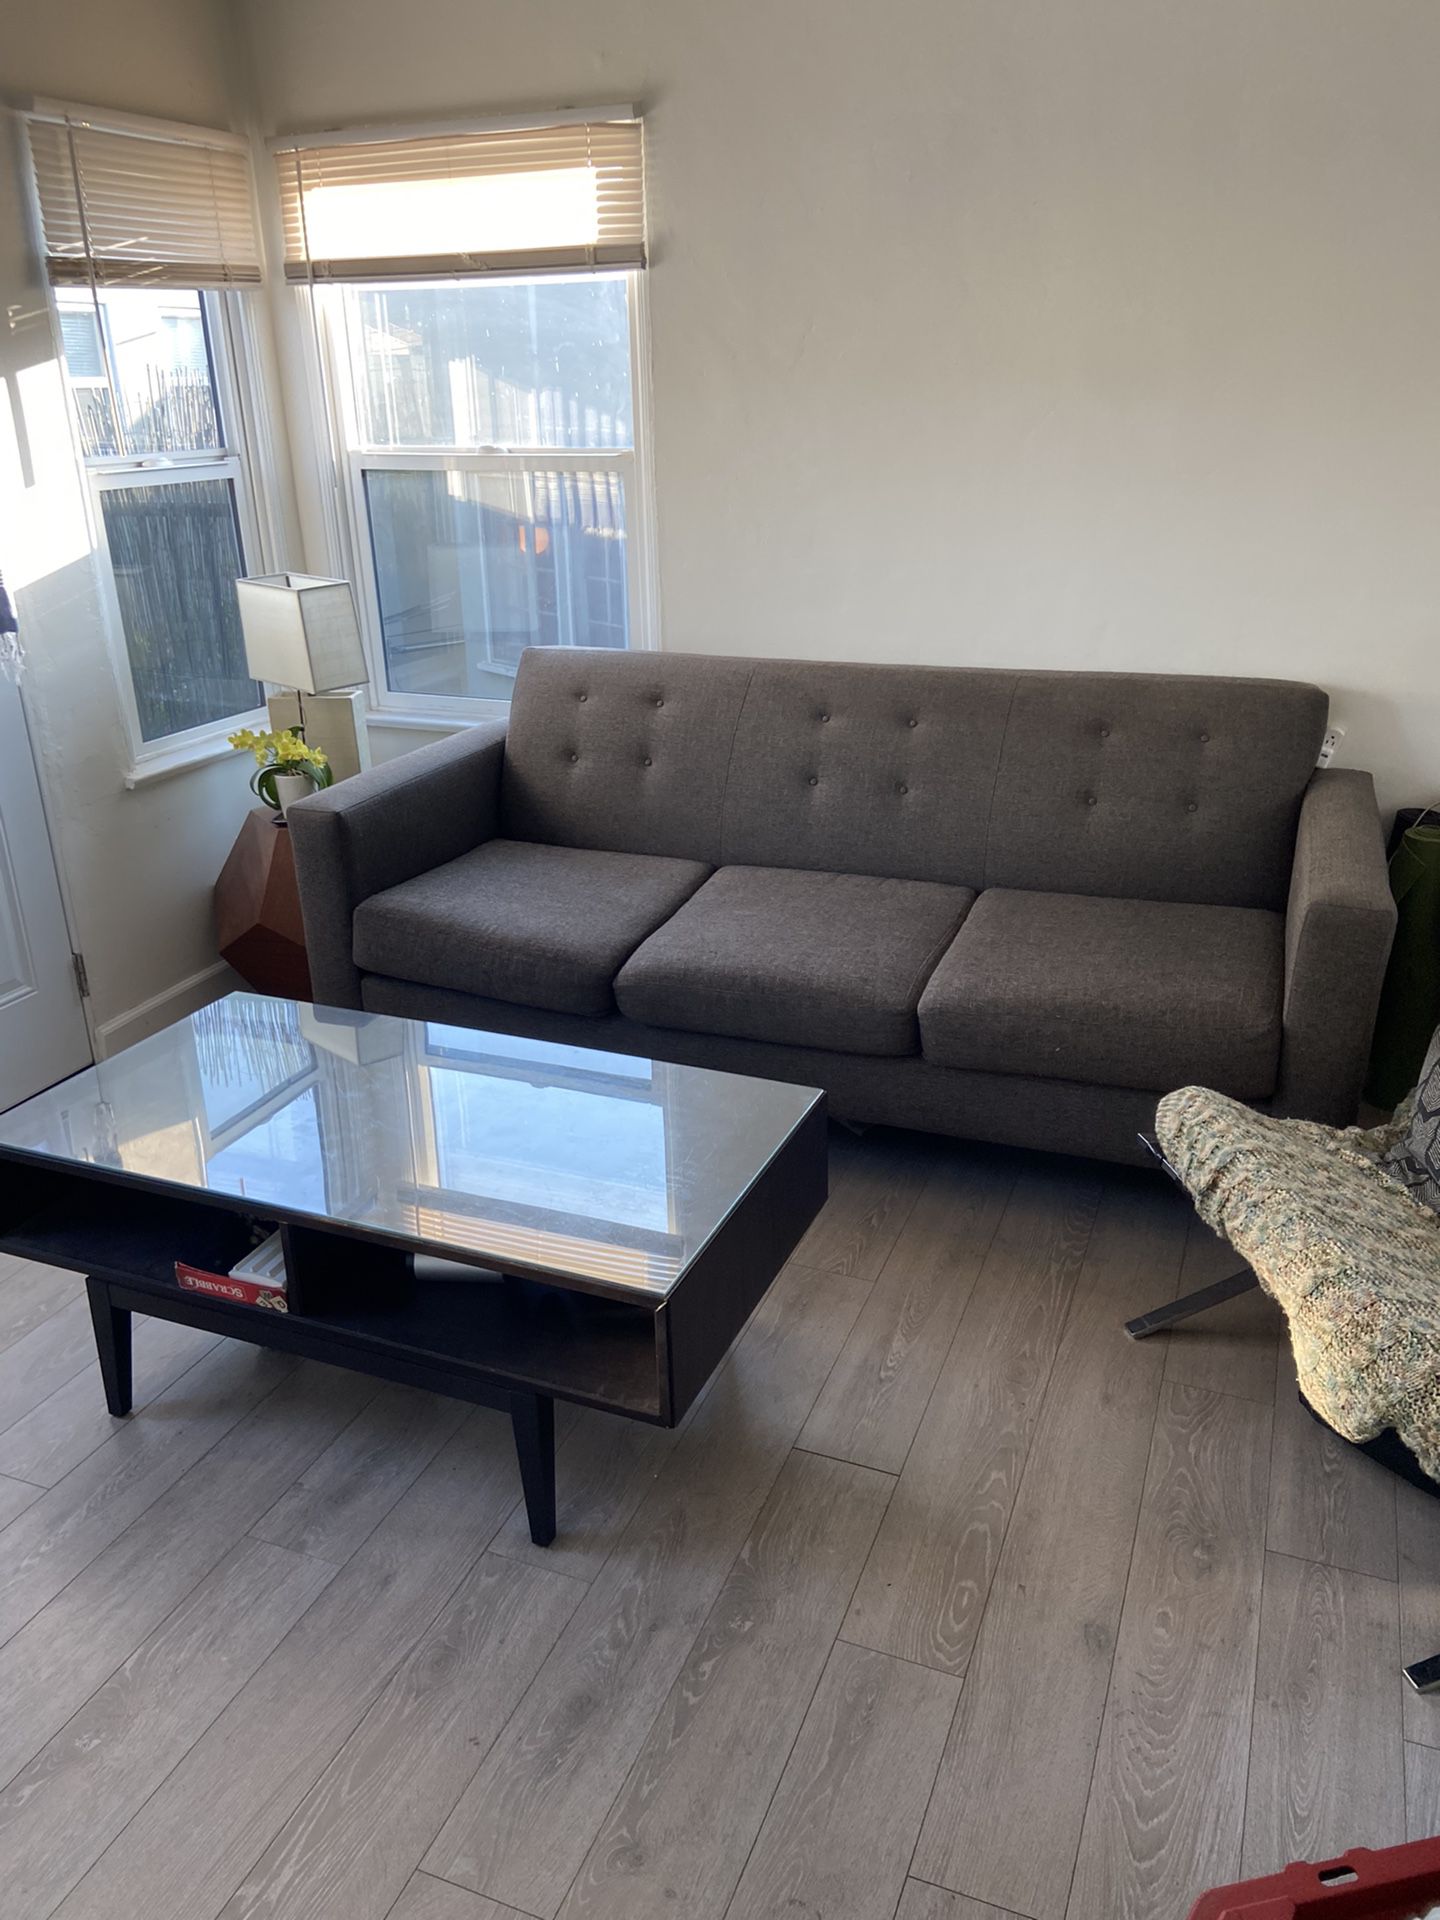 Grey Couch / Sofa - Wood Midcentury Legs - Needs To Go Today Saturday